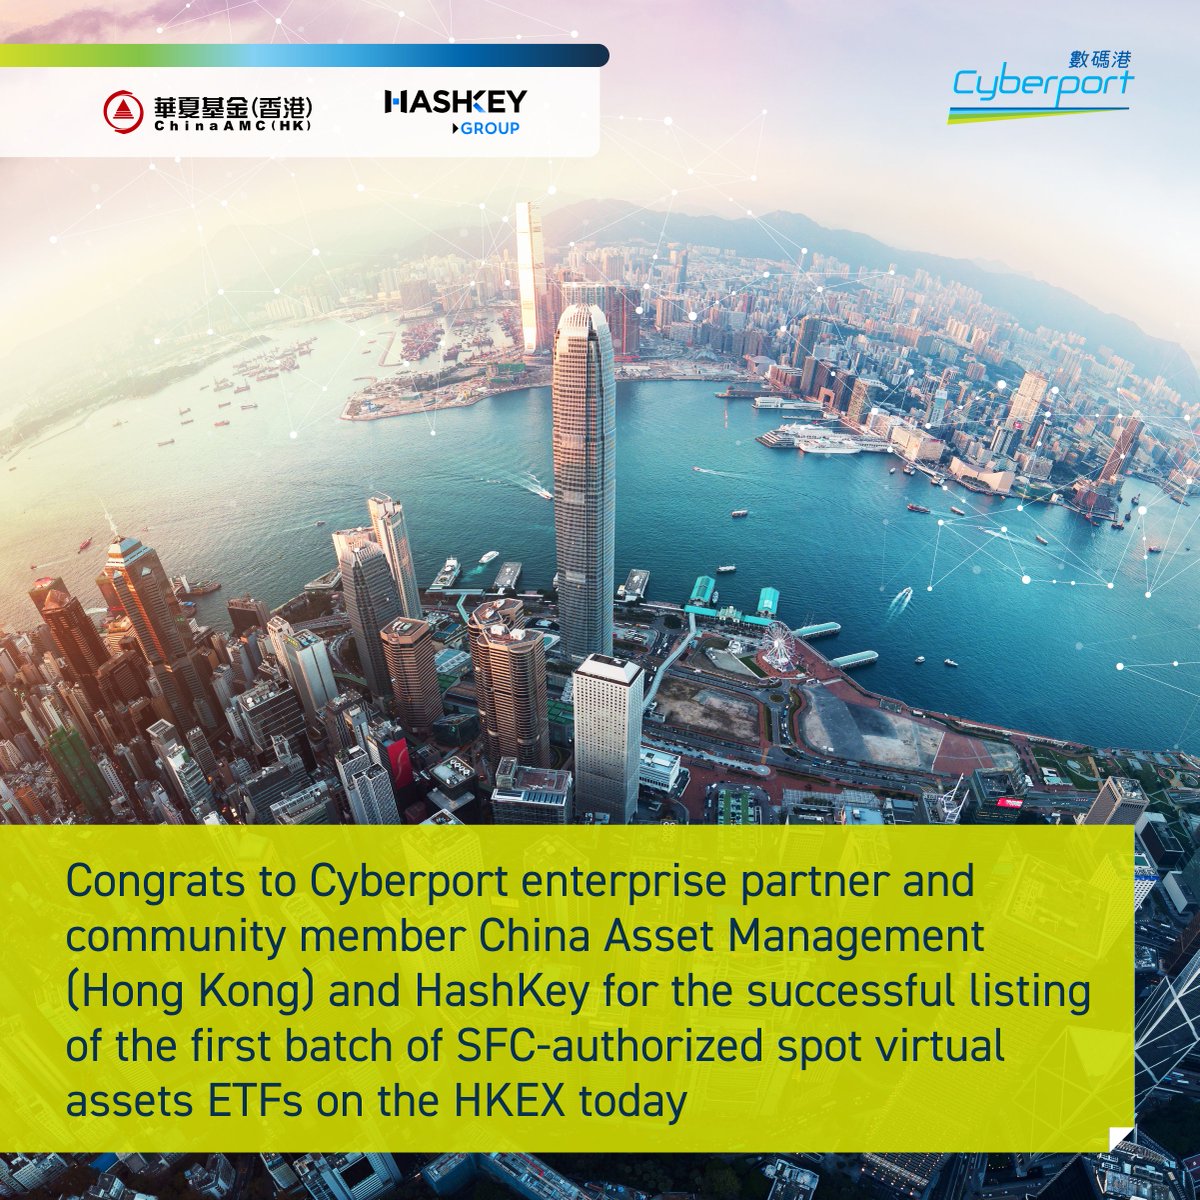 Congrats to Cyberport enterprise partner and community member China Asset Management (Hong Kong) and @HashKeyGroup for the successful listing of the first batch of SFC-authorized spot virtual assets ETFs on the HKEX today !!!